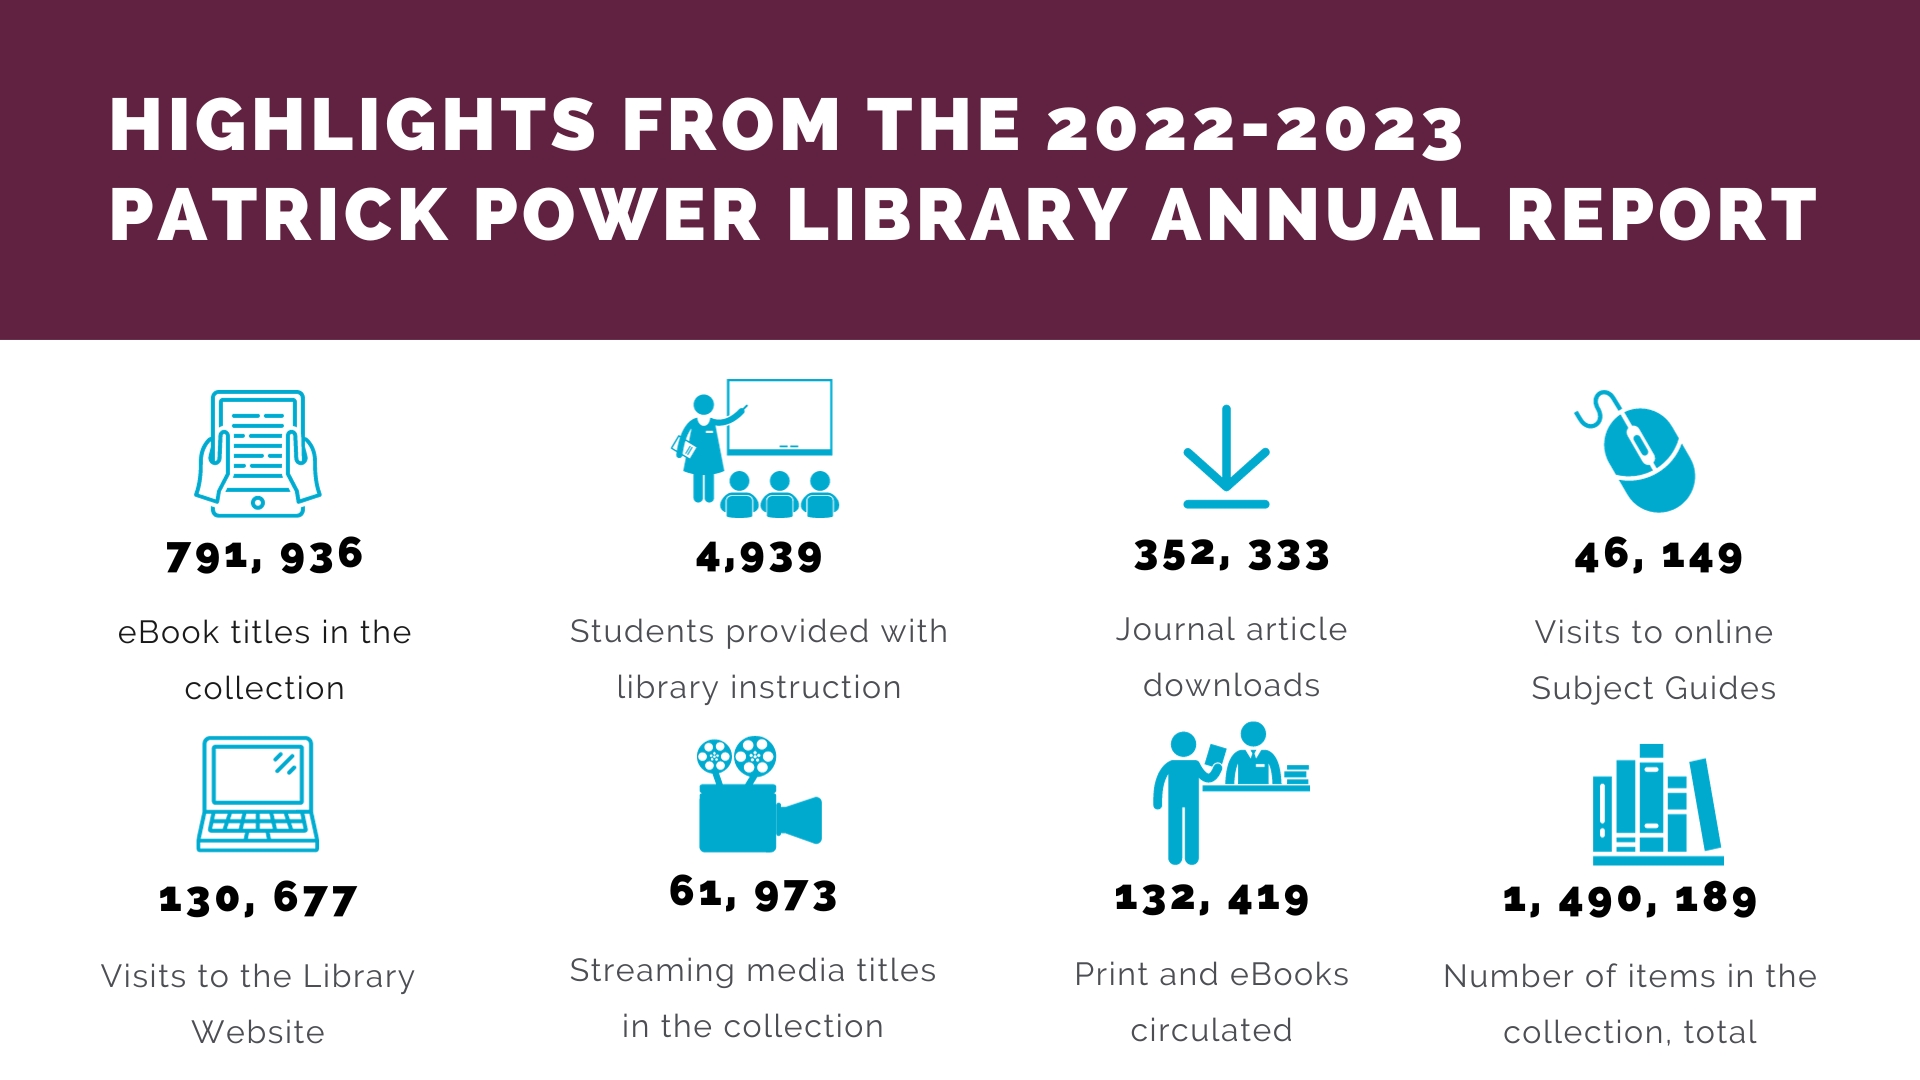 Highlighted statistics from the 2022-2023 Patrick Power Library Annual Report. Ebook titles in the collection: 791936. Students taught in library instruction: 4939. Journal articles downloaded: 352333. Subject guides accessed: 46149. Website visits: 130677. Streaming media titles in the collection: 61973. Print and ebooks circulated: 132419. Total number of items in the collection: 1490189.